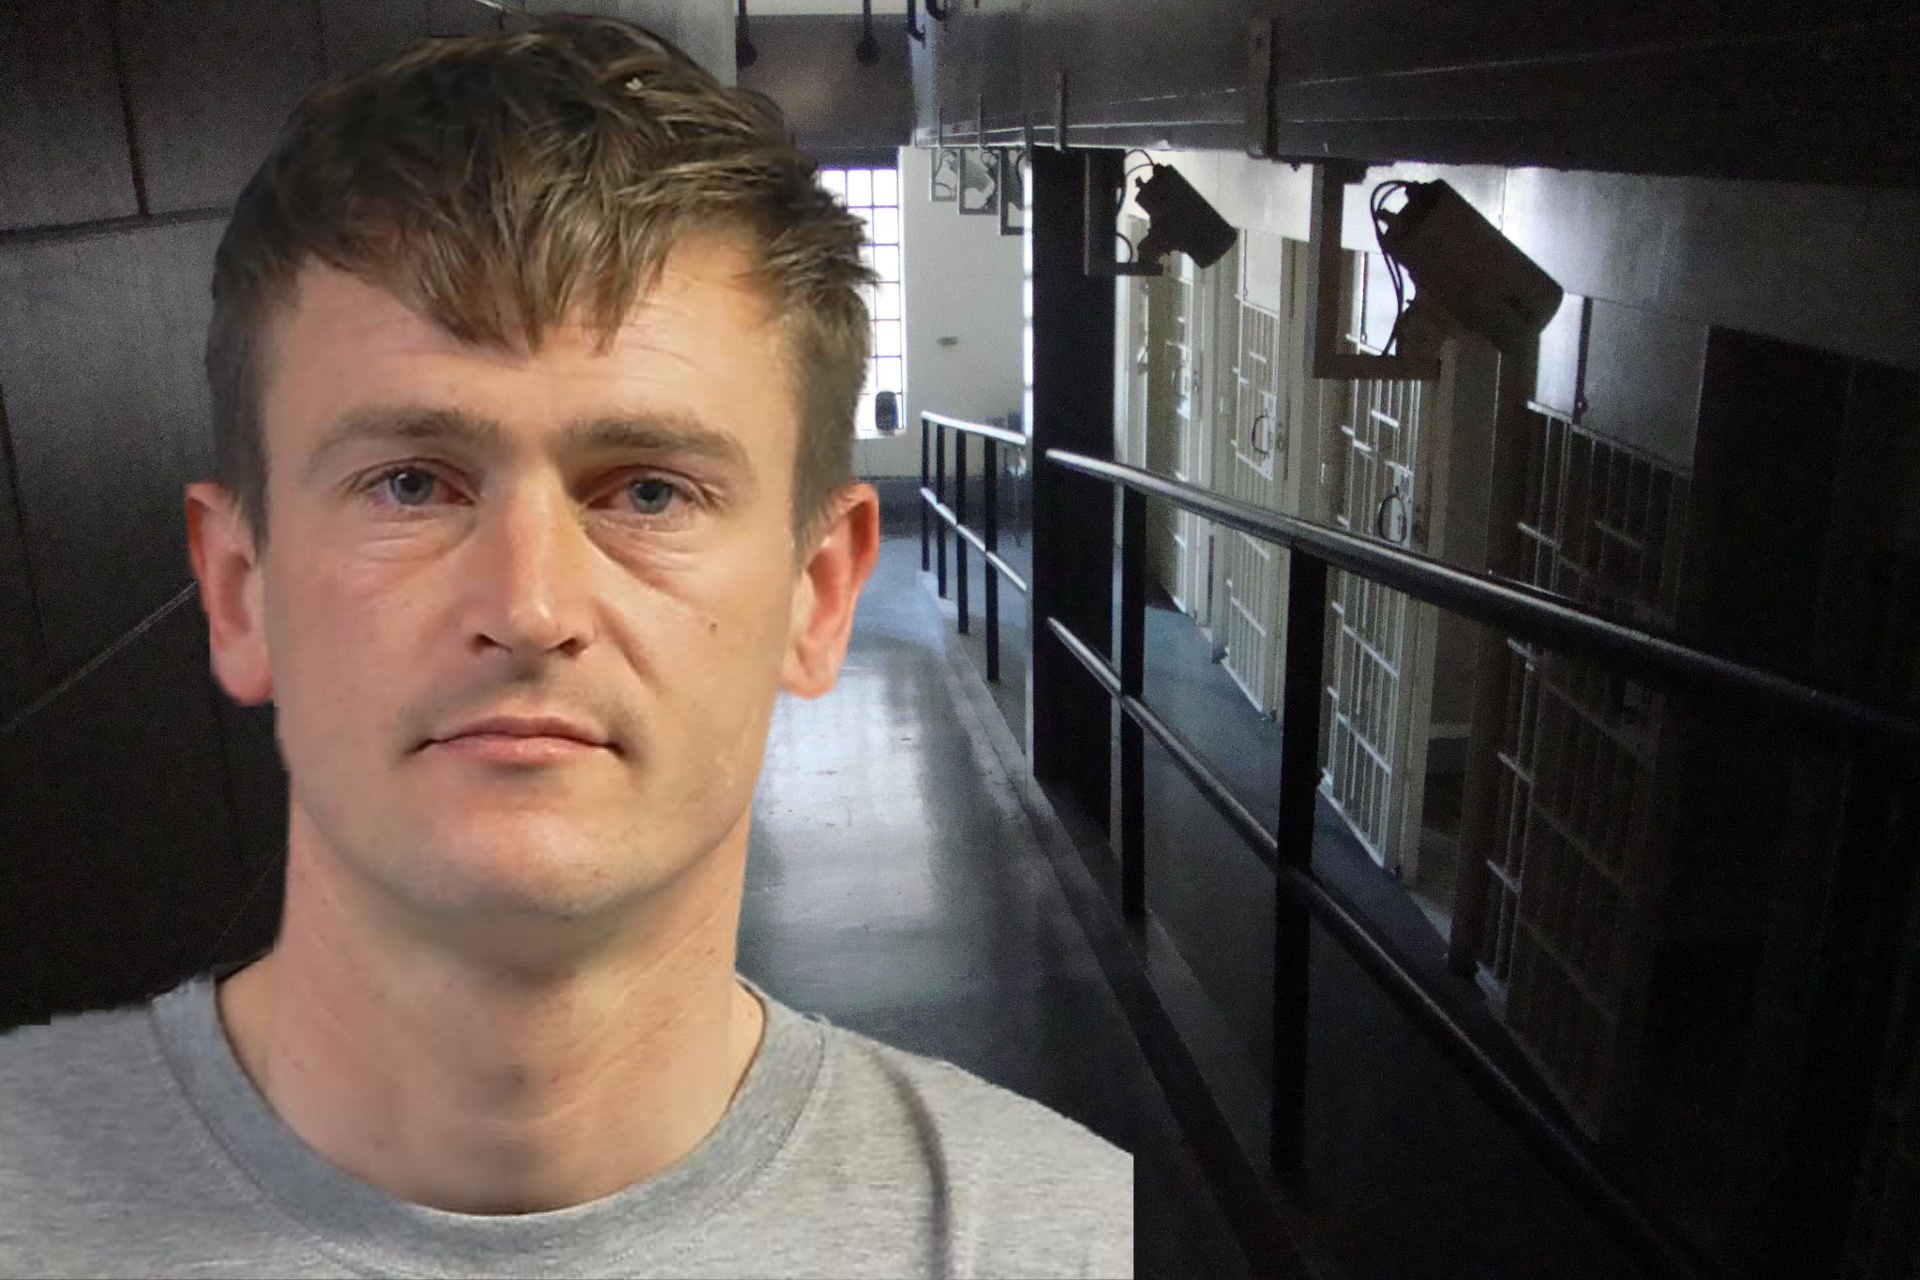 Mugshot of Dan Taylor with jail corridor in background